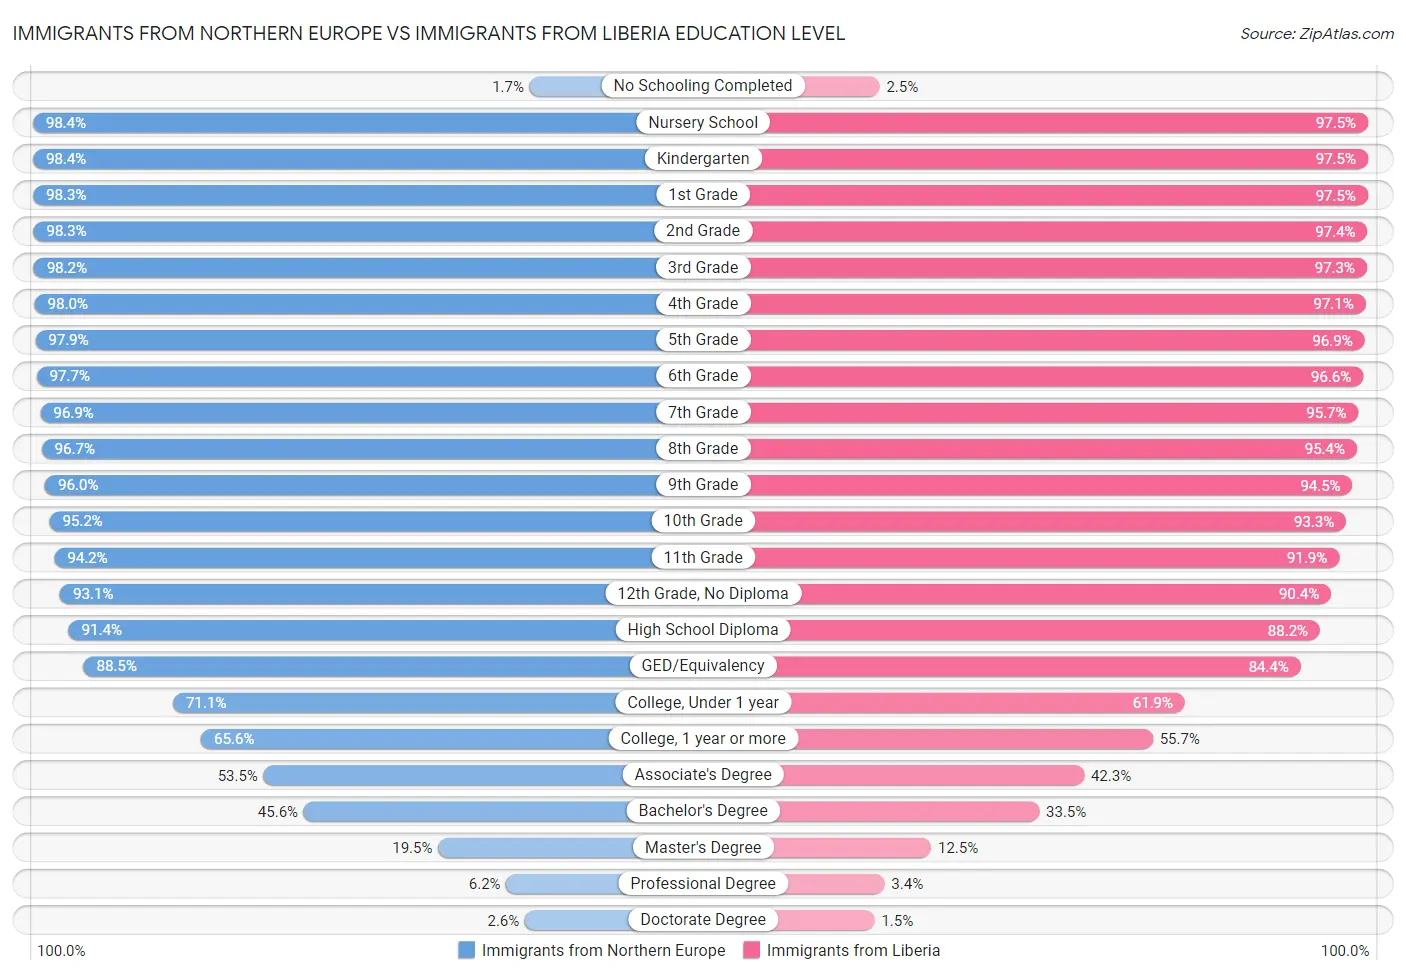 Immigrants from Northern Europe vs Immigrants from Liberia Education Level